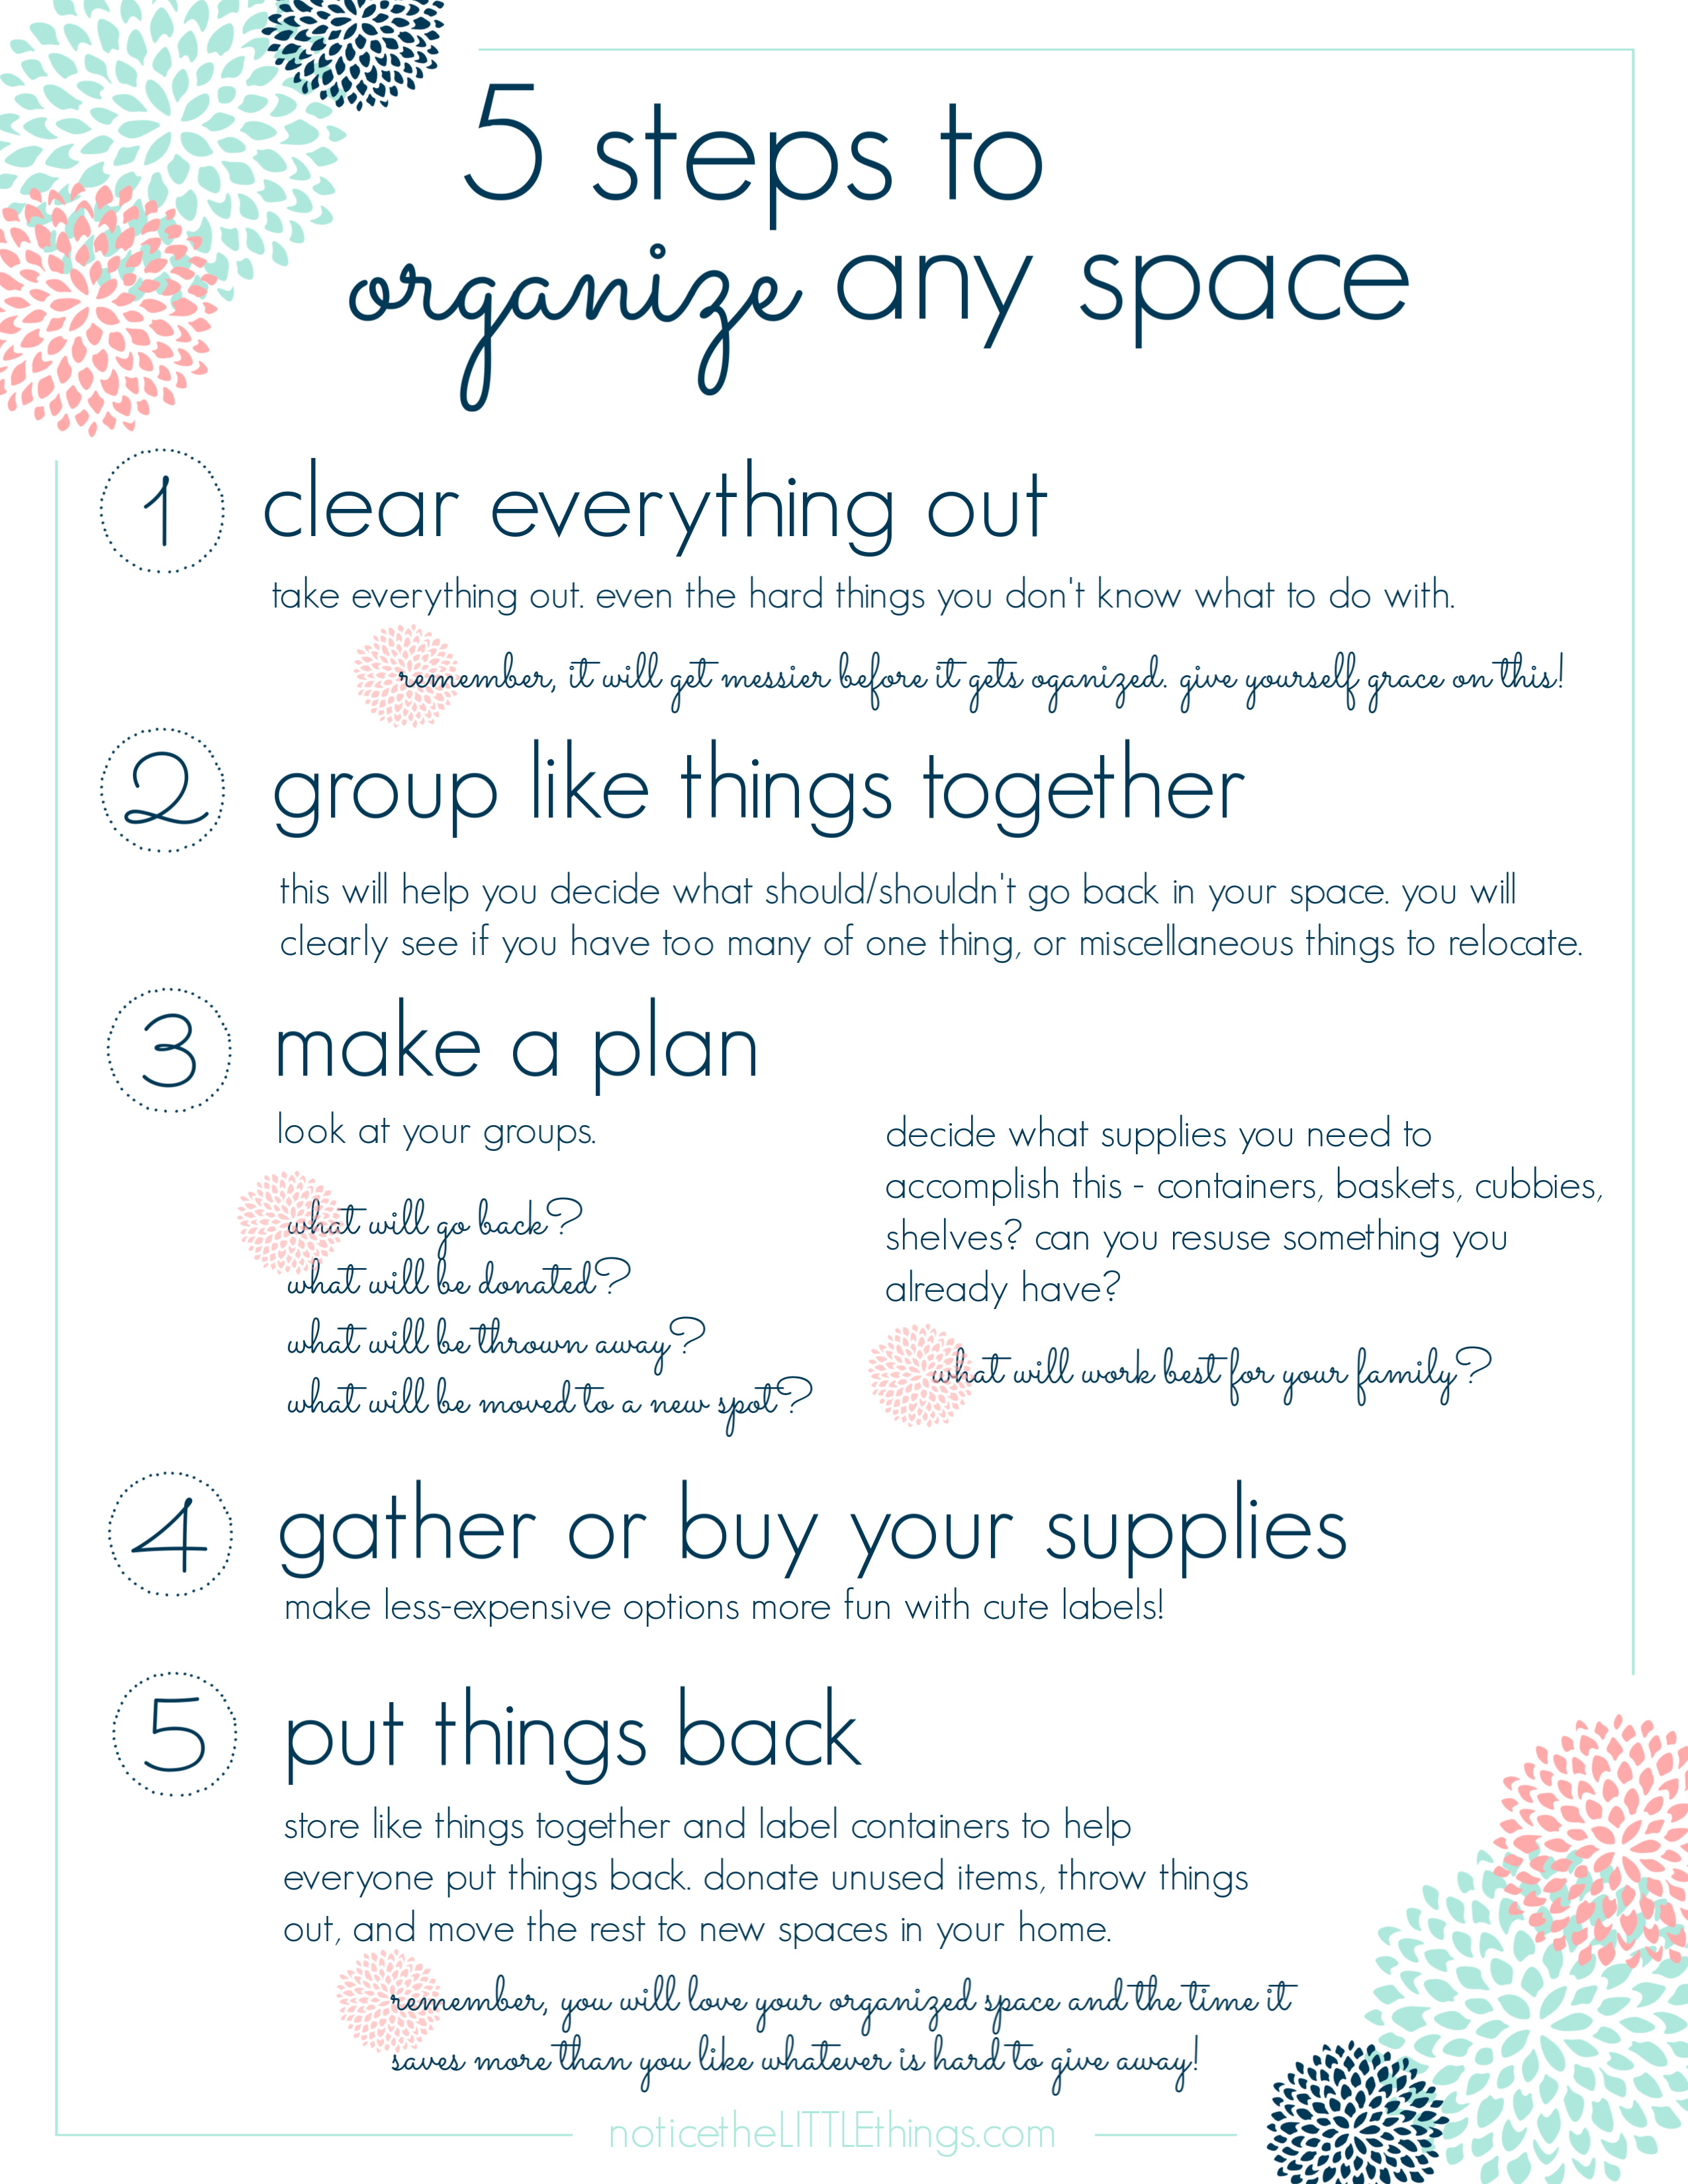 how to organize any space